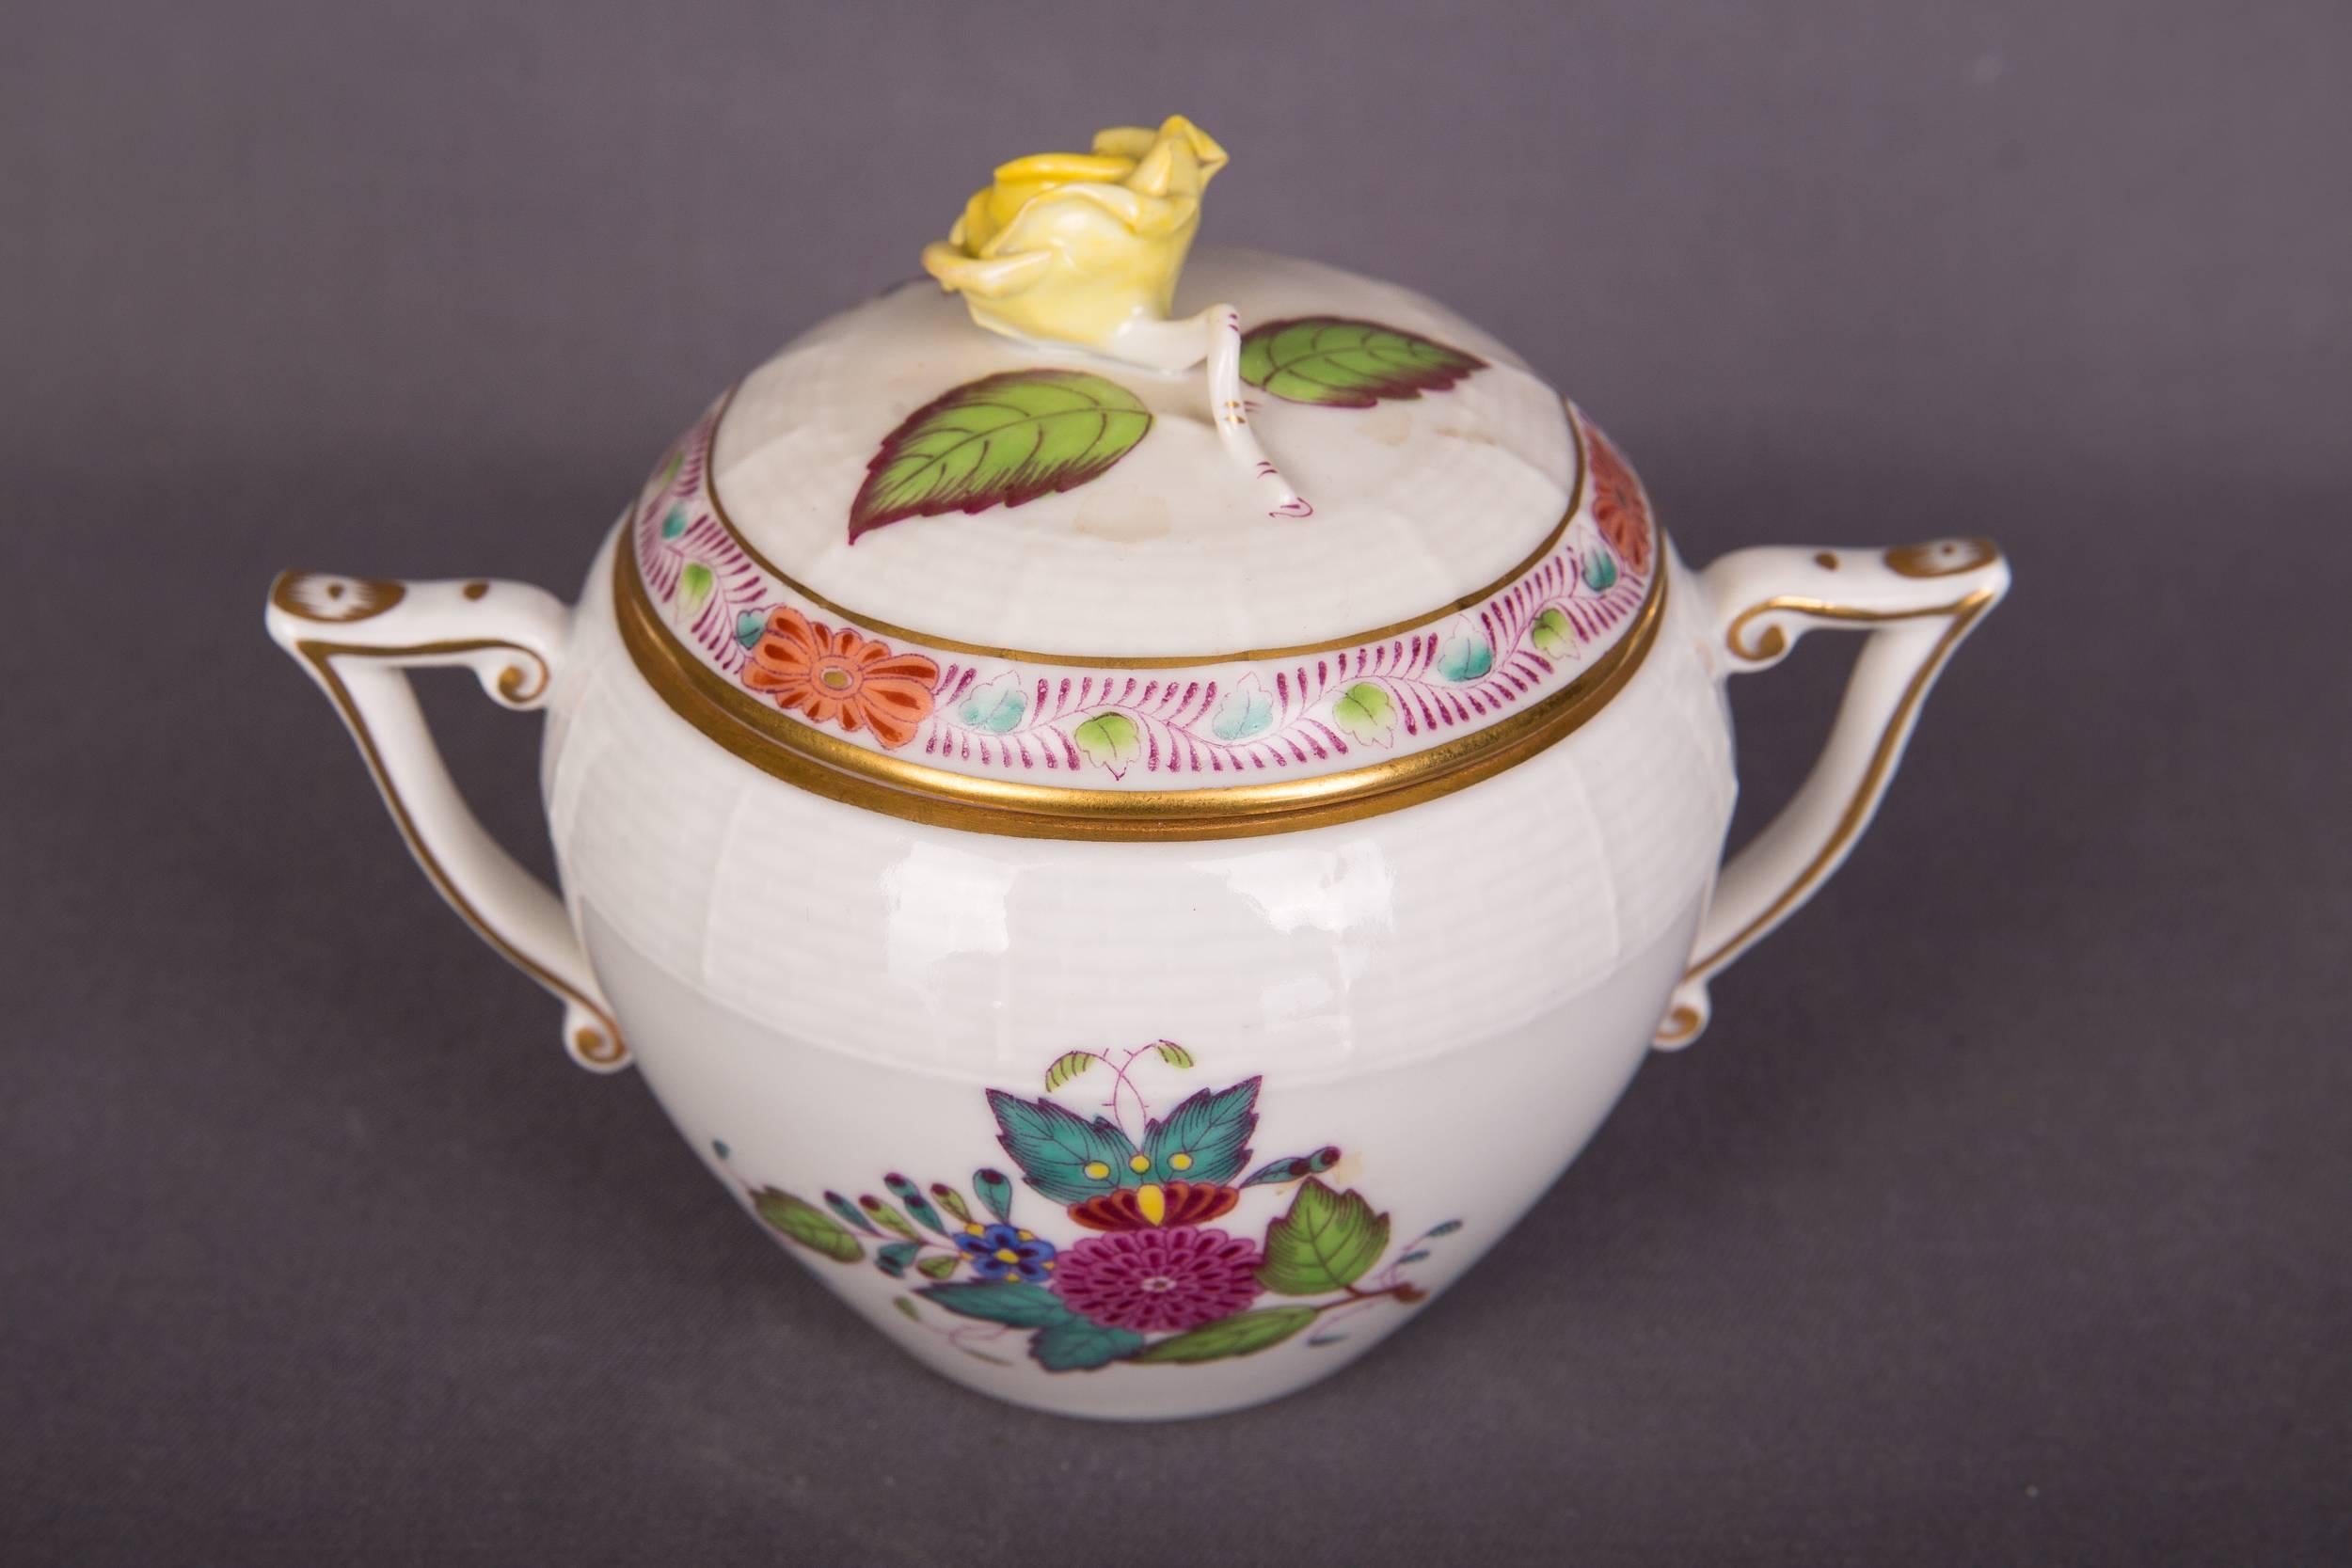 Beautiful Rare Herend Coffee Service Porcelain with Lots of Flowers and Gold 1